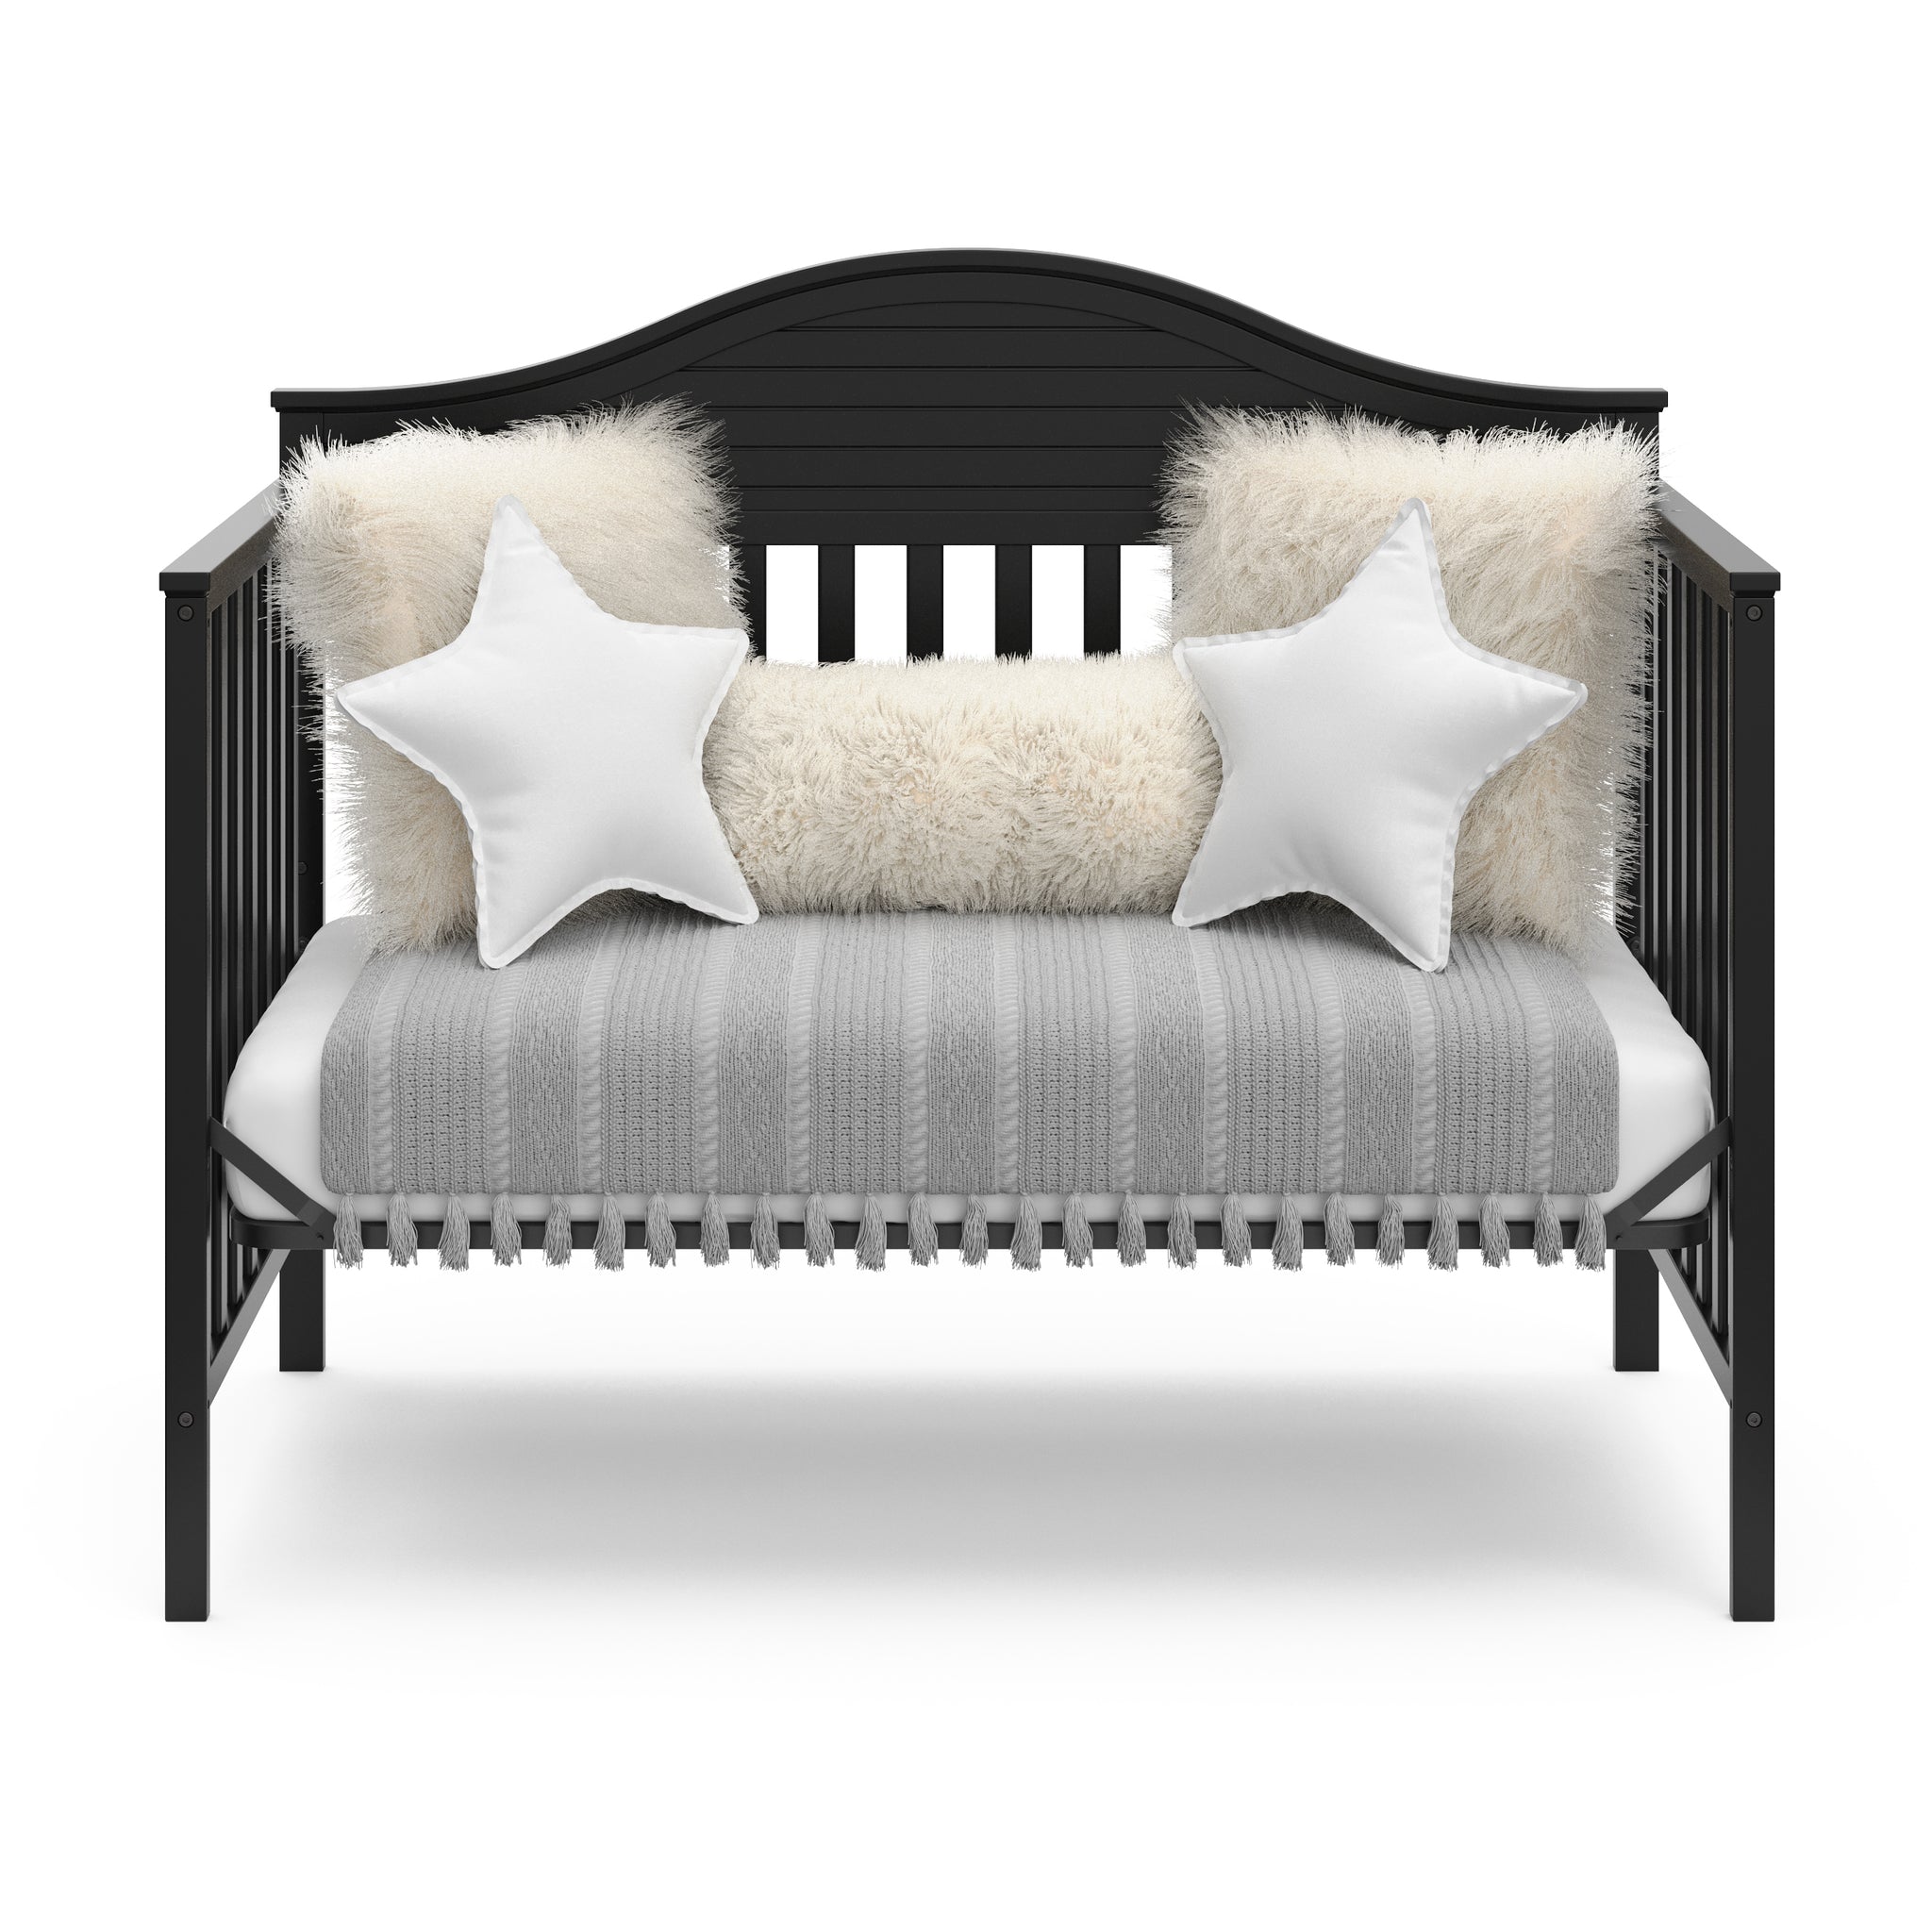 black crib in daybed conversion